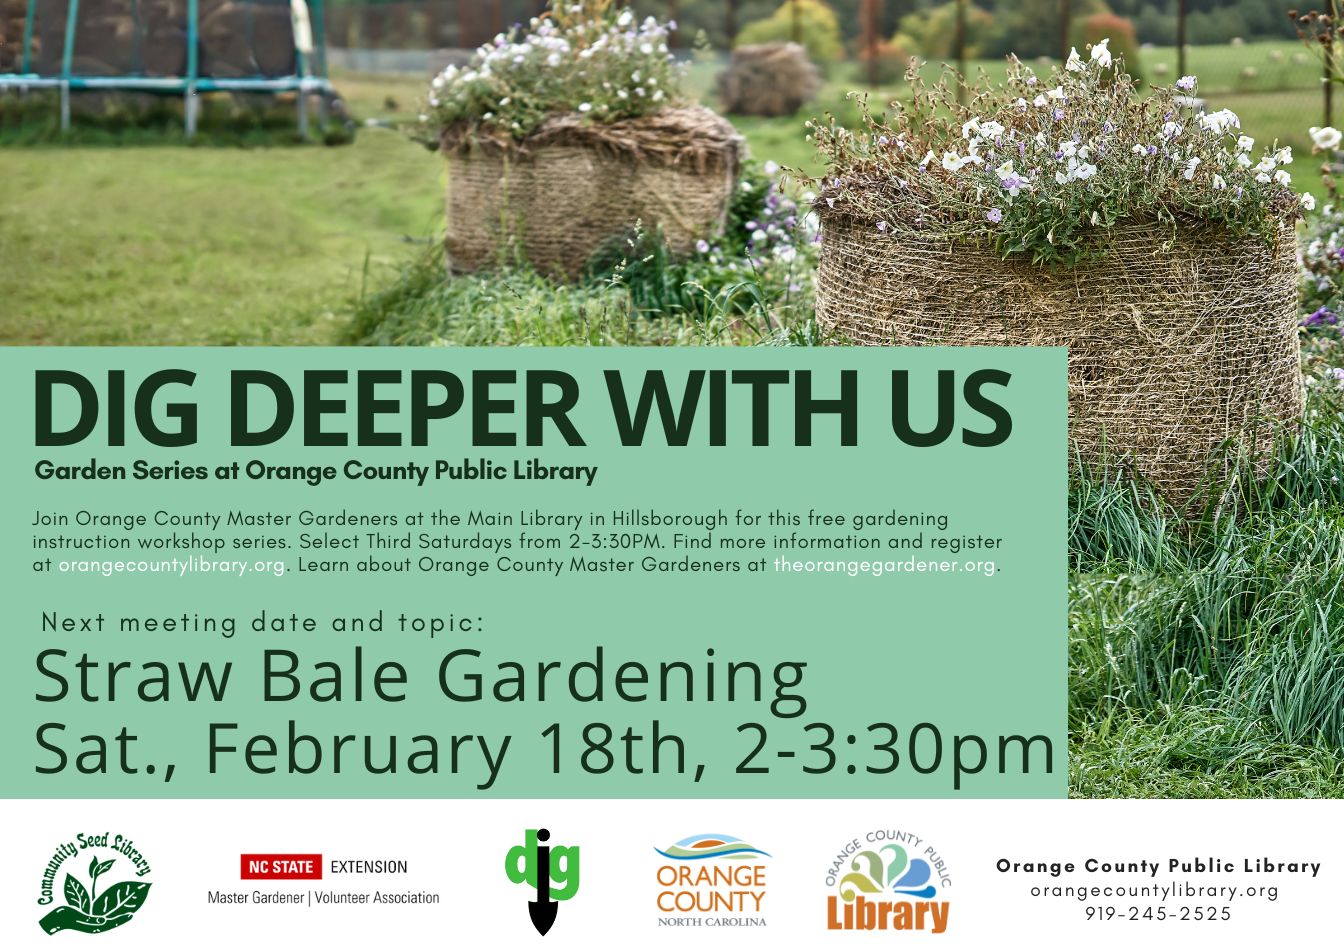 Dig Deeper with Us Gardening Series. This month's topic: Straw Bale Gardening. Saturday, March 18th from 2-3:30 pm at the Main Library in Hillsborough, NC.